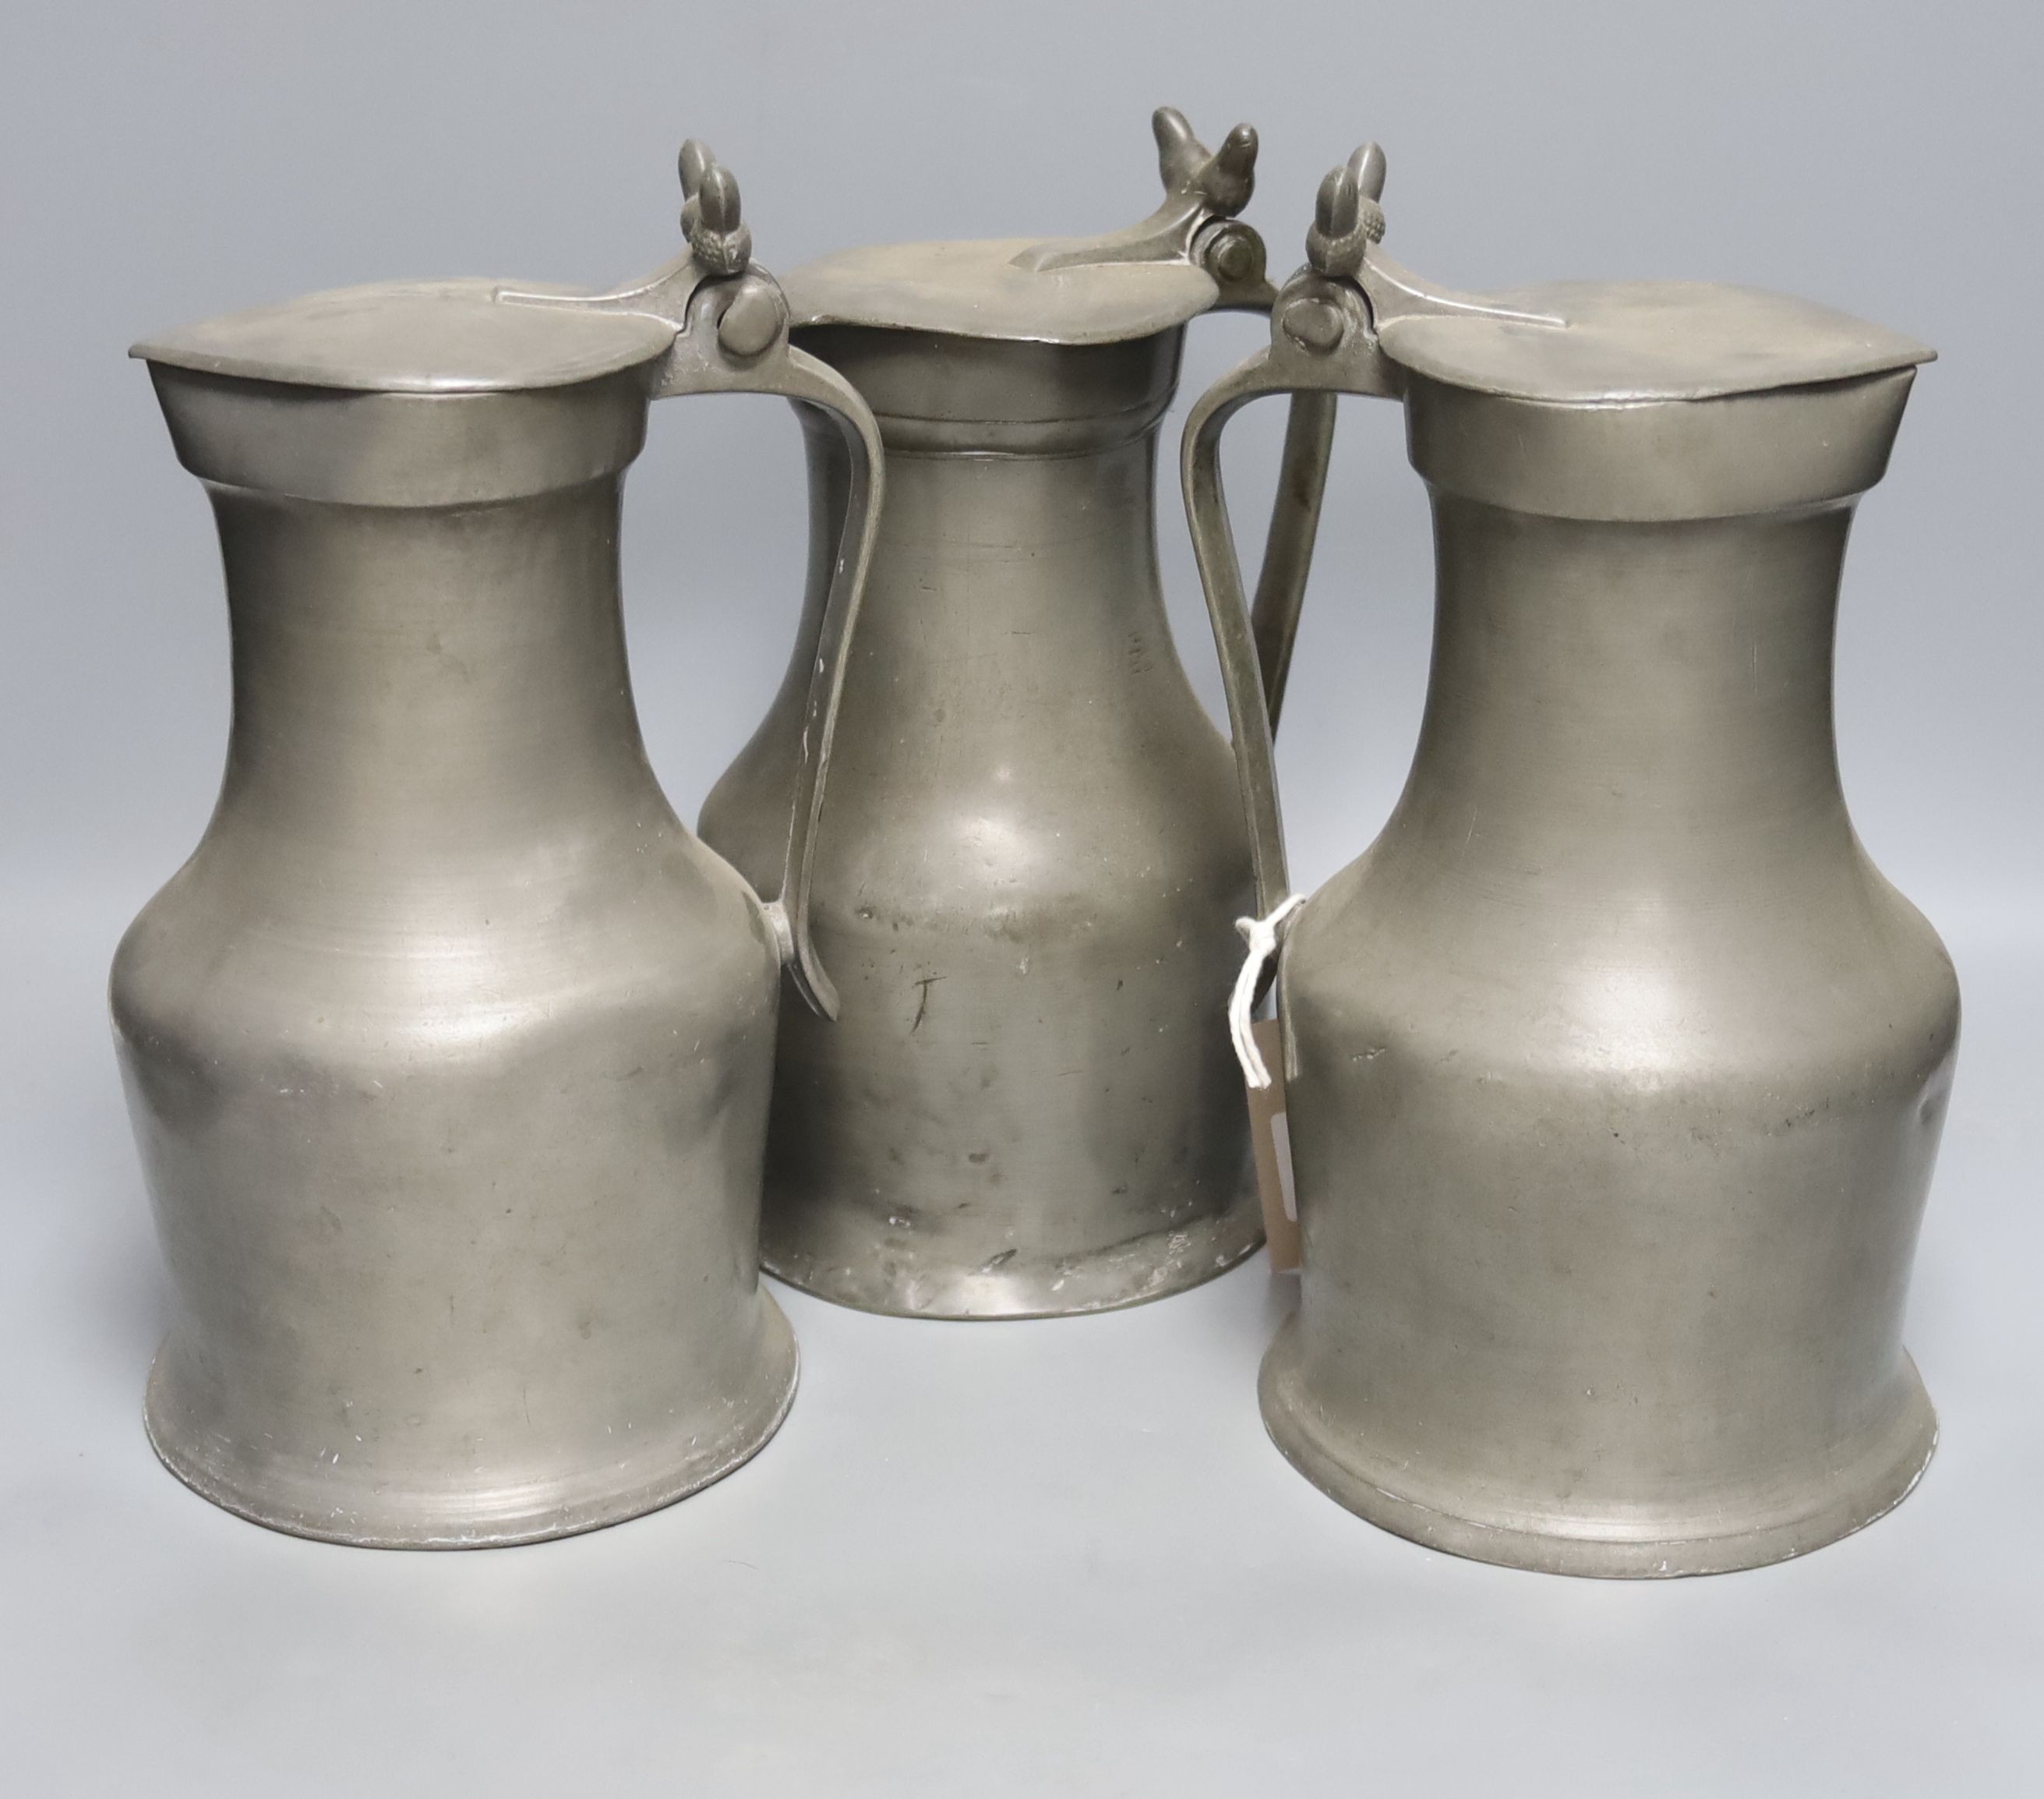 Three 18th century French pewter flagon measures, tallest 27cm, one marked